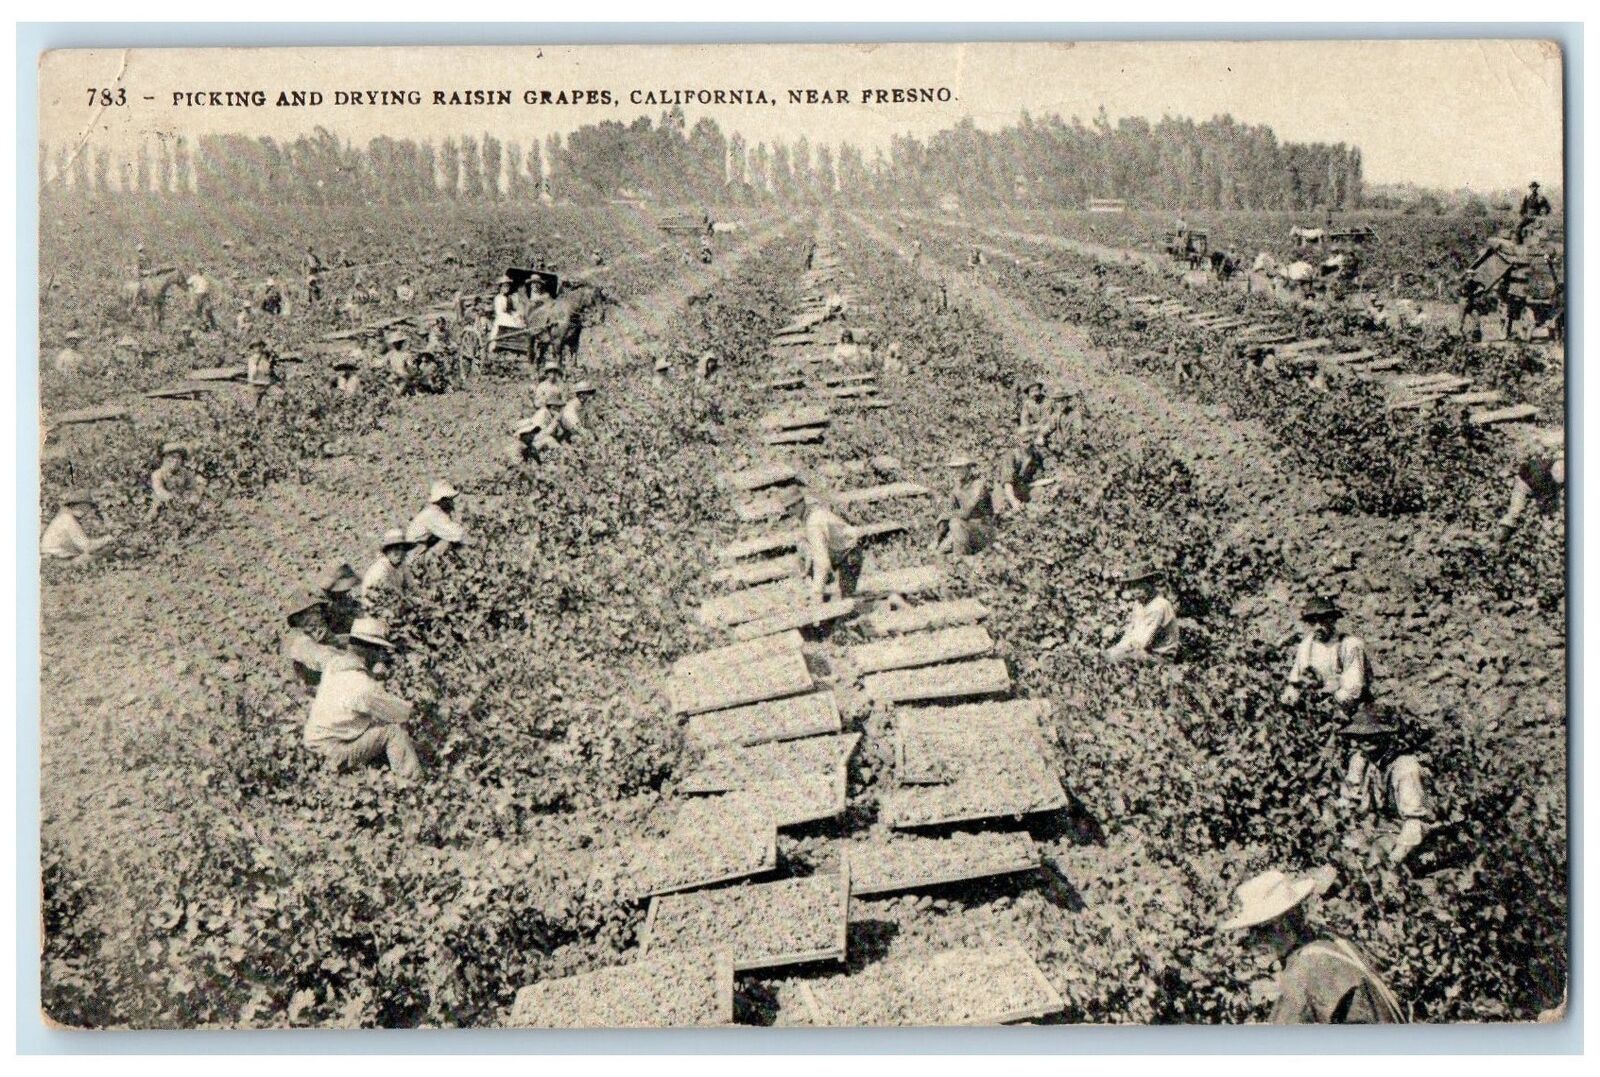 1907 Picking & Drying Raisin Grapes Workers Presno California CA Posted Postcard